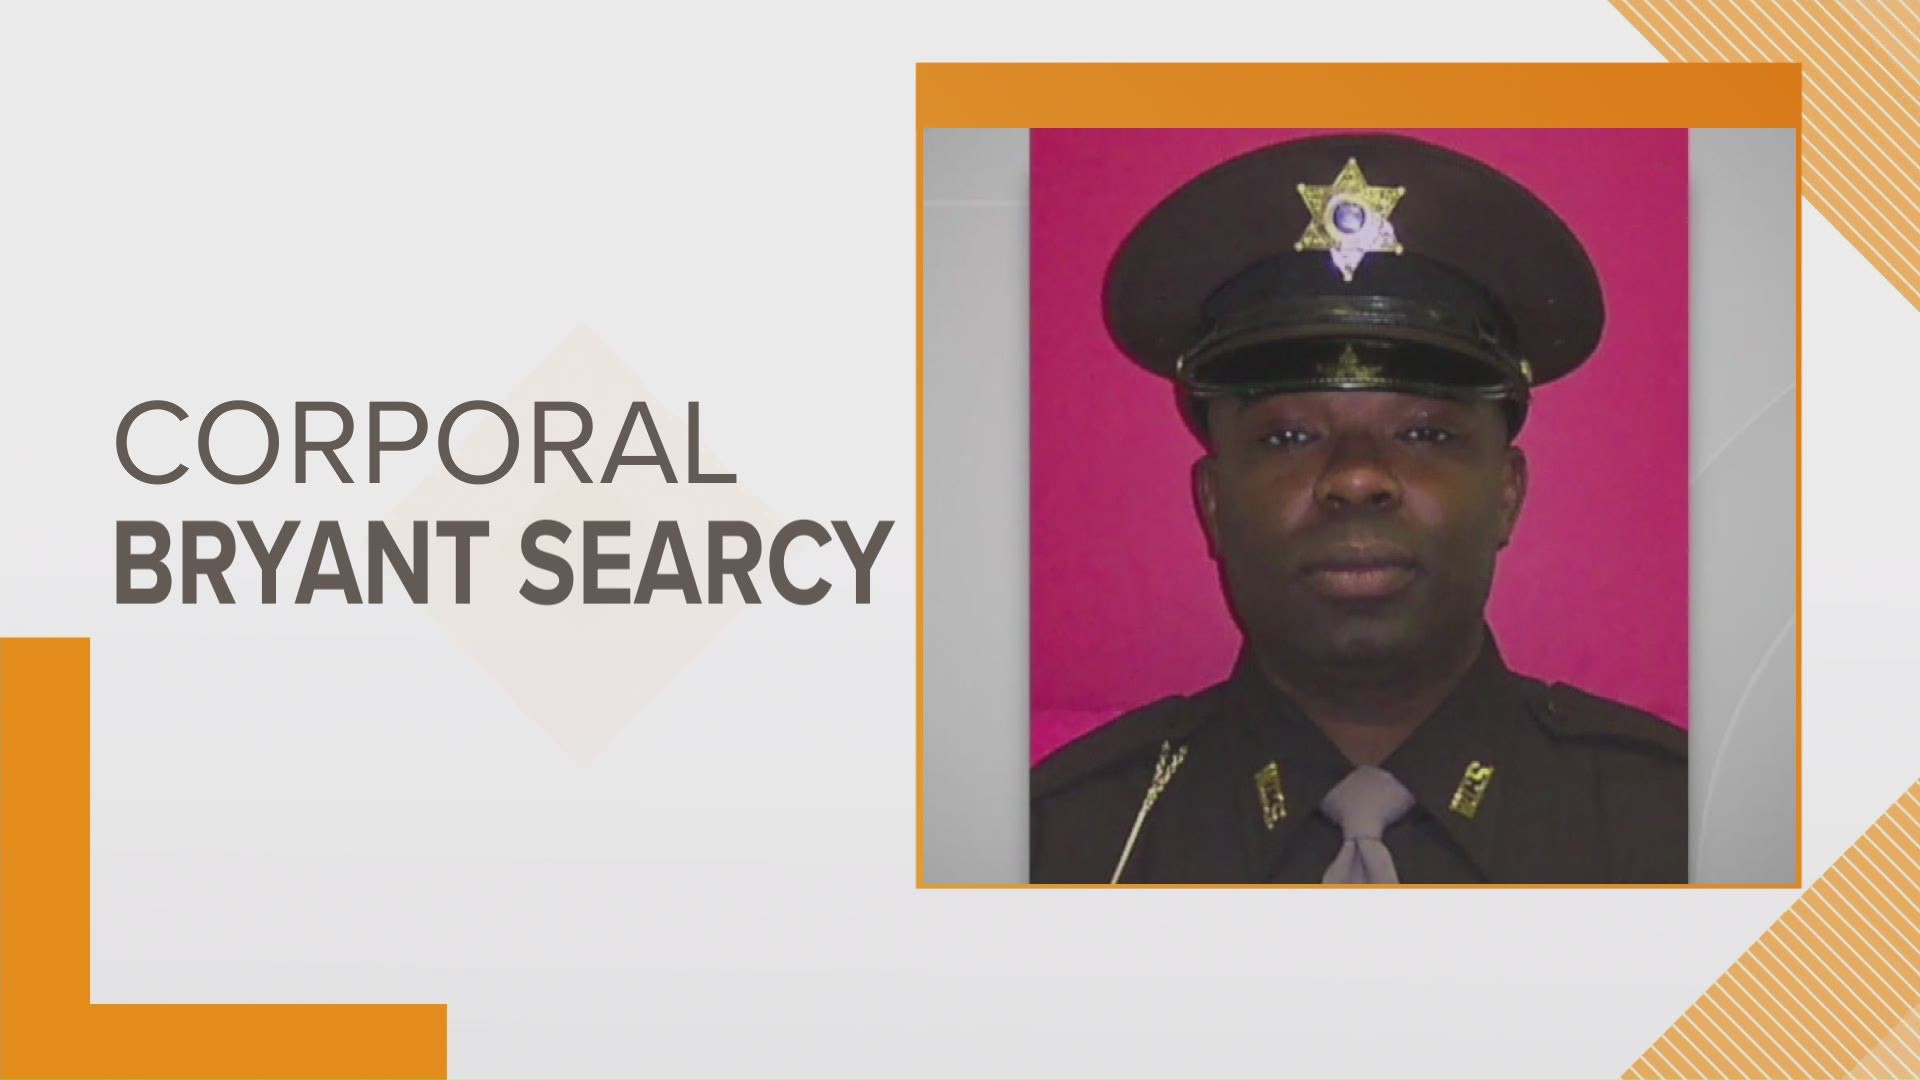 Gov. Gretchen Whitmer has ordered U.S. and Michigan flags to be lowered to half-staff on Thursday to honor late Wayne County Sheriff’s Corporal Bryant Searcy.